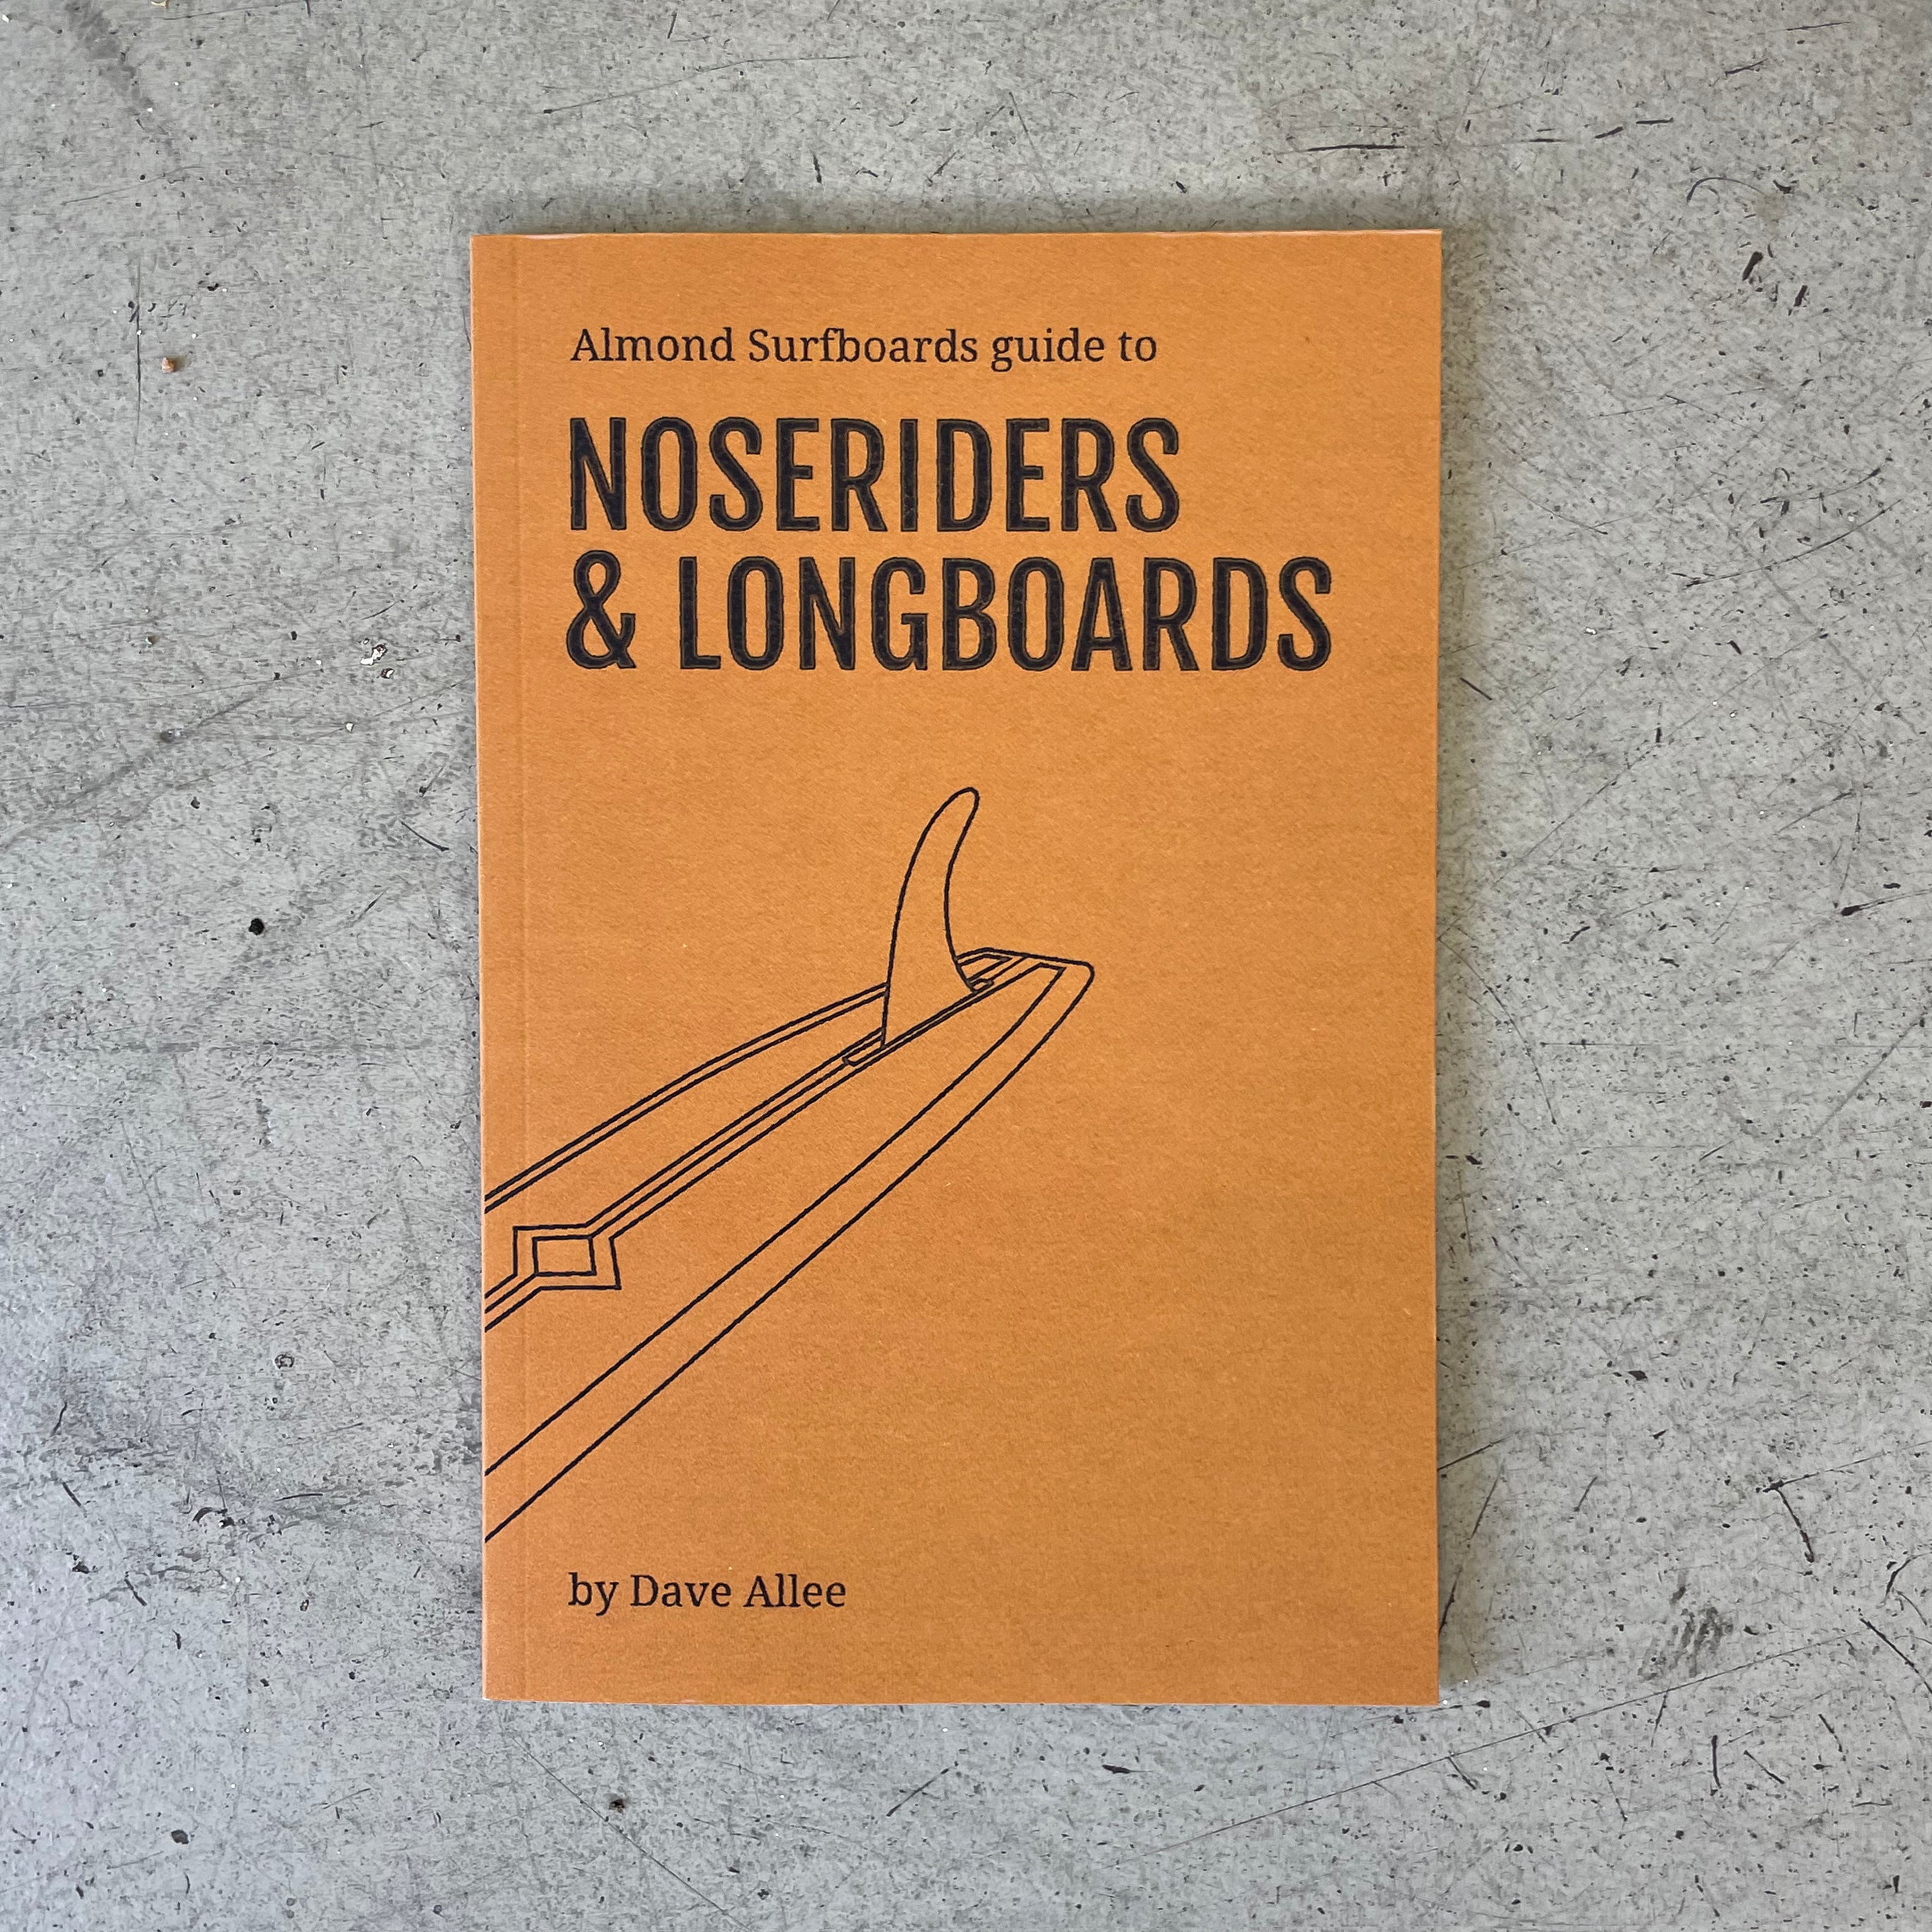 Almond's Guide to Noseriders & Longboards (Paperback)